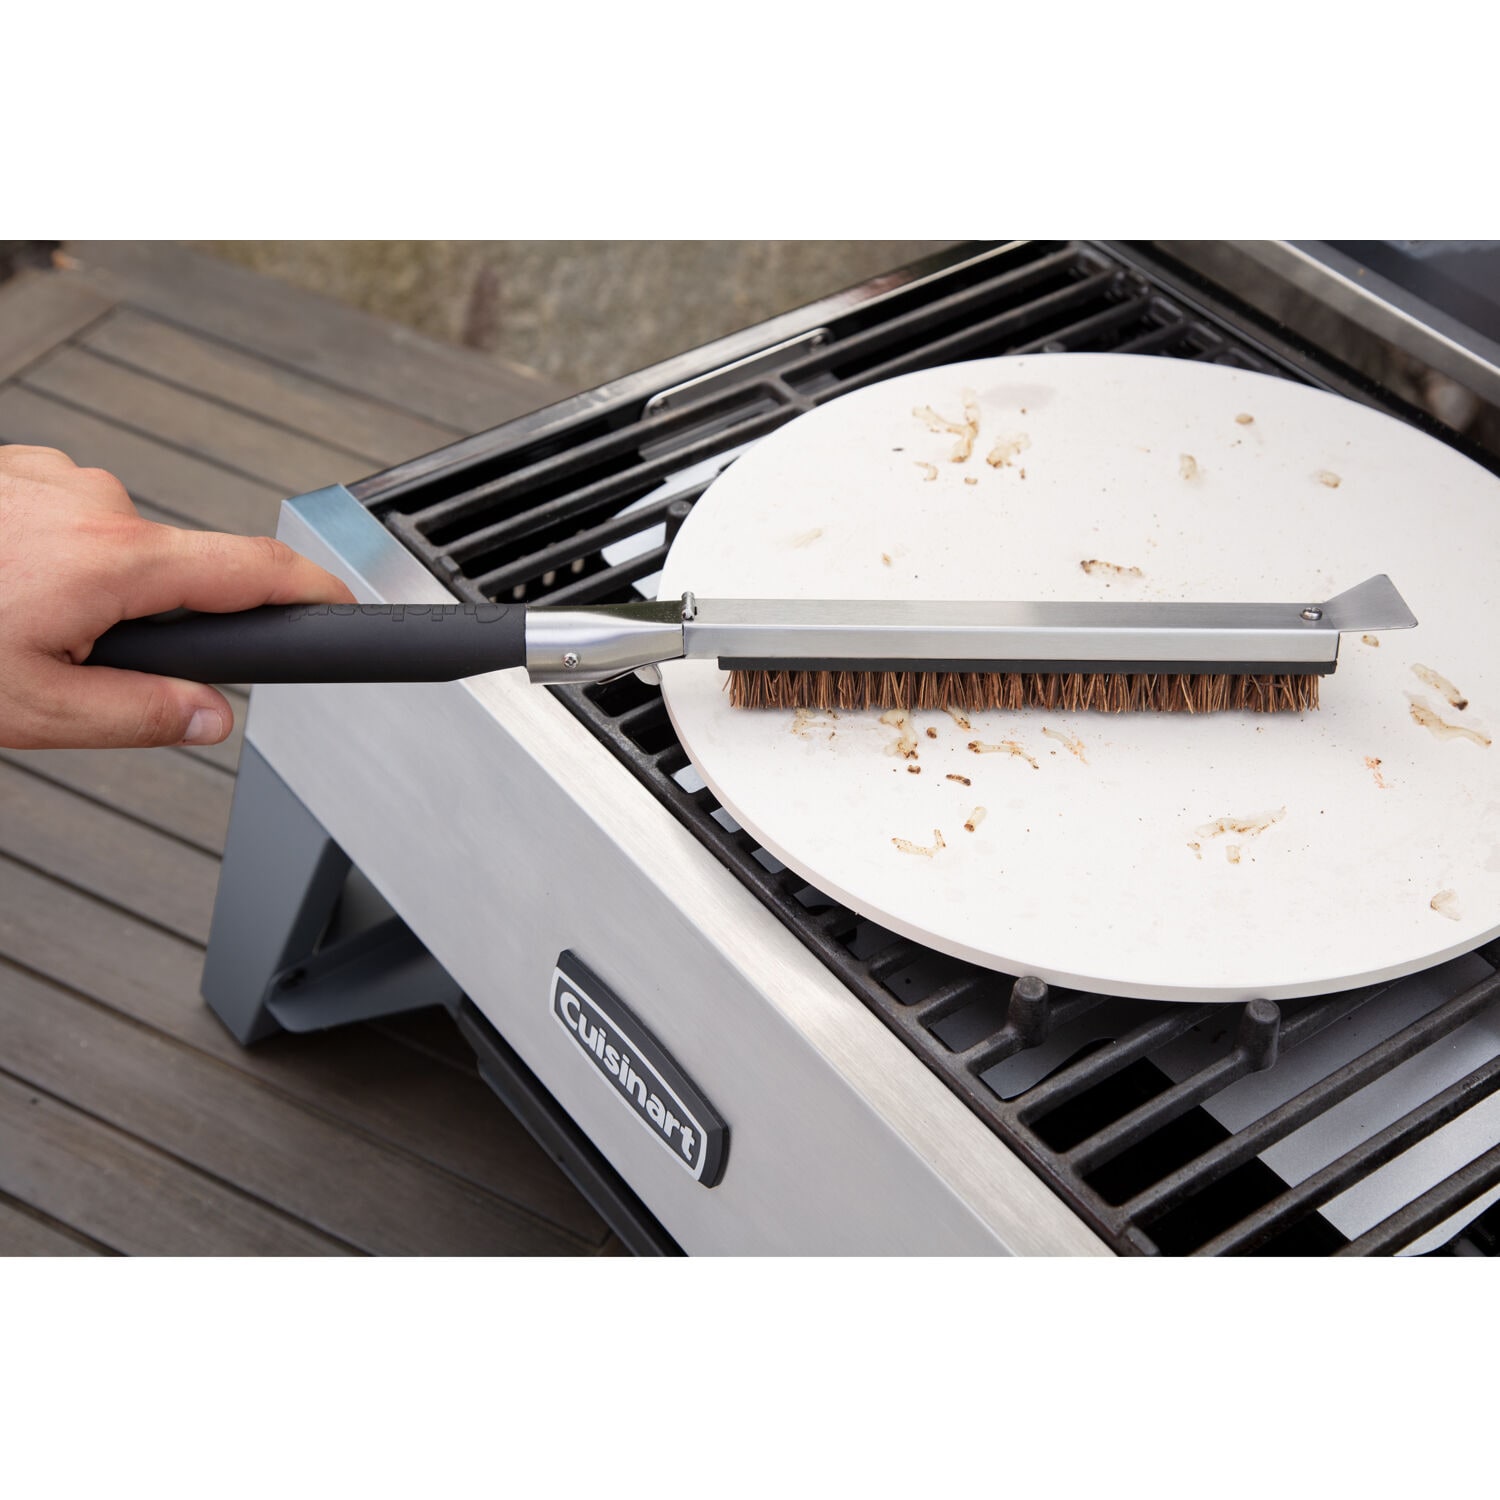 BBQ Grill Cleaning Brush Stainless Steel Barbecue Cleaner Scraper 16.5in  Handle Stiff Wire Bristles For Grill Cooking Grates